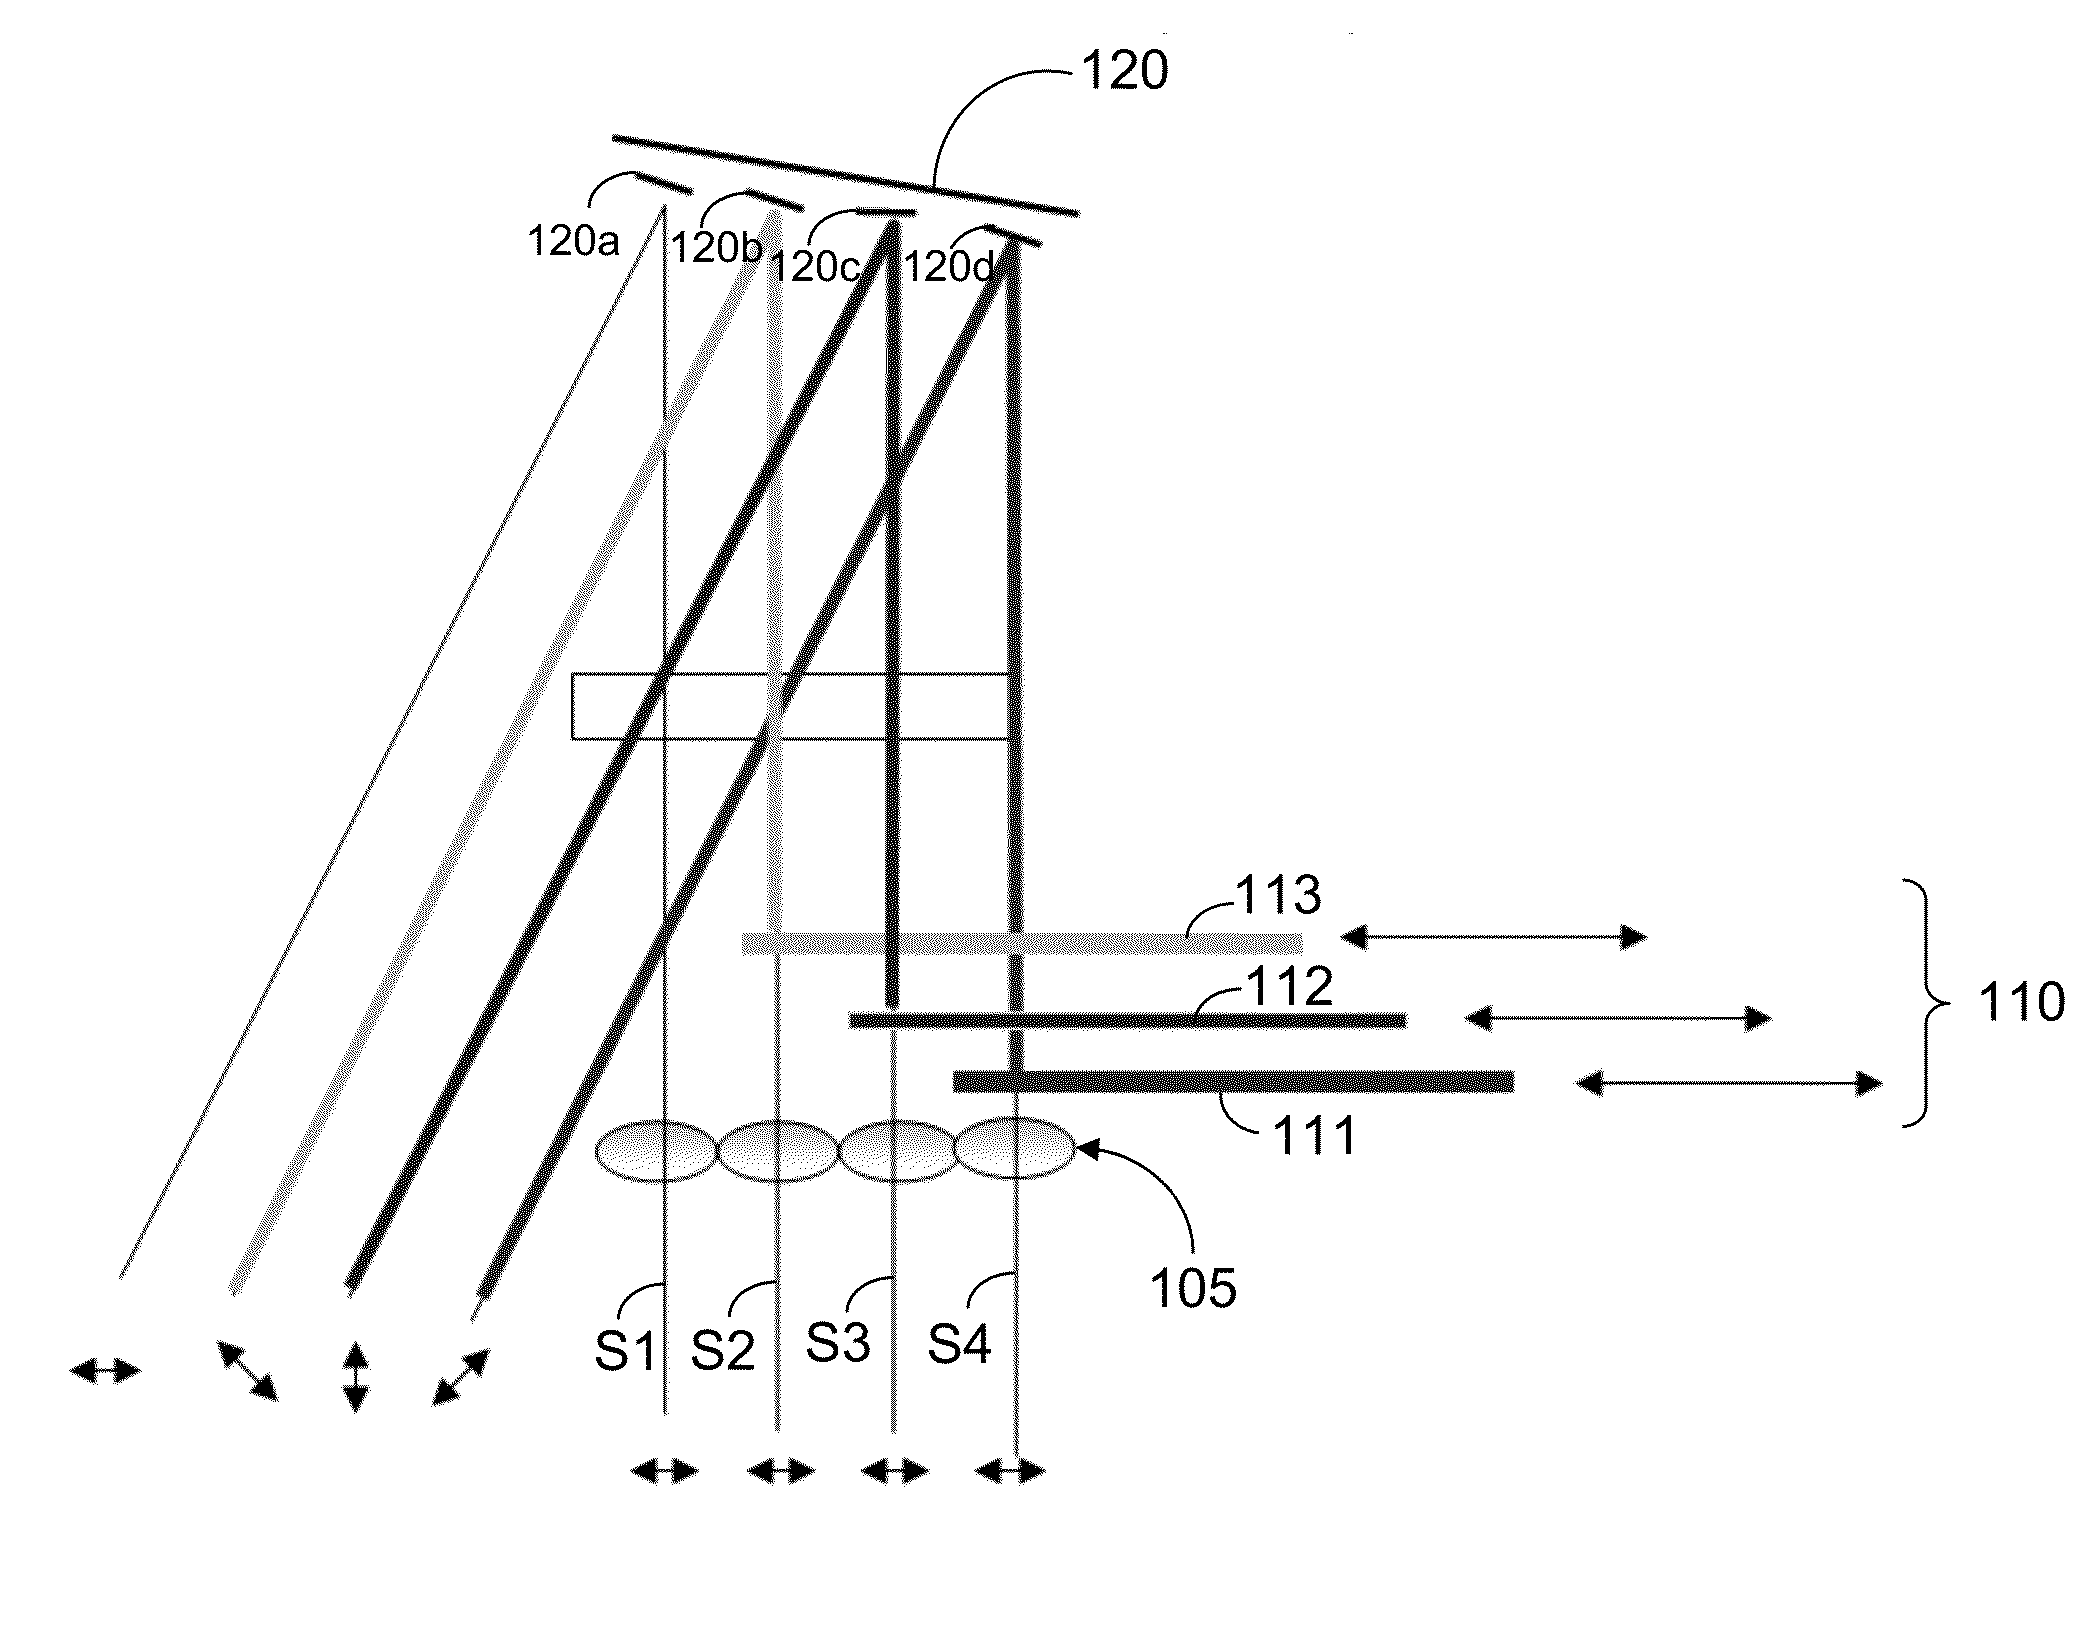 Optical system of a microlithographic projection exposure apparatus